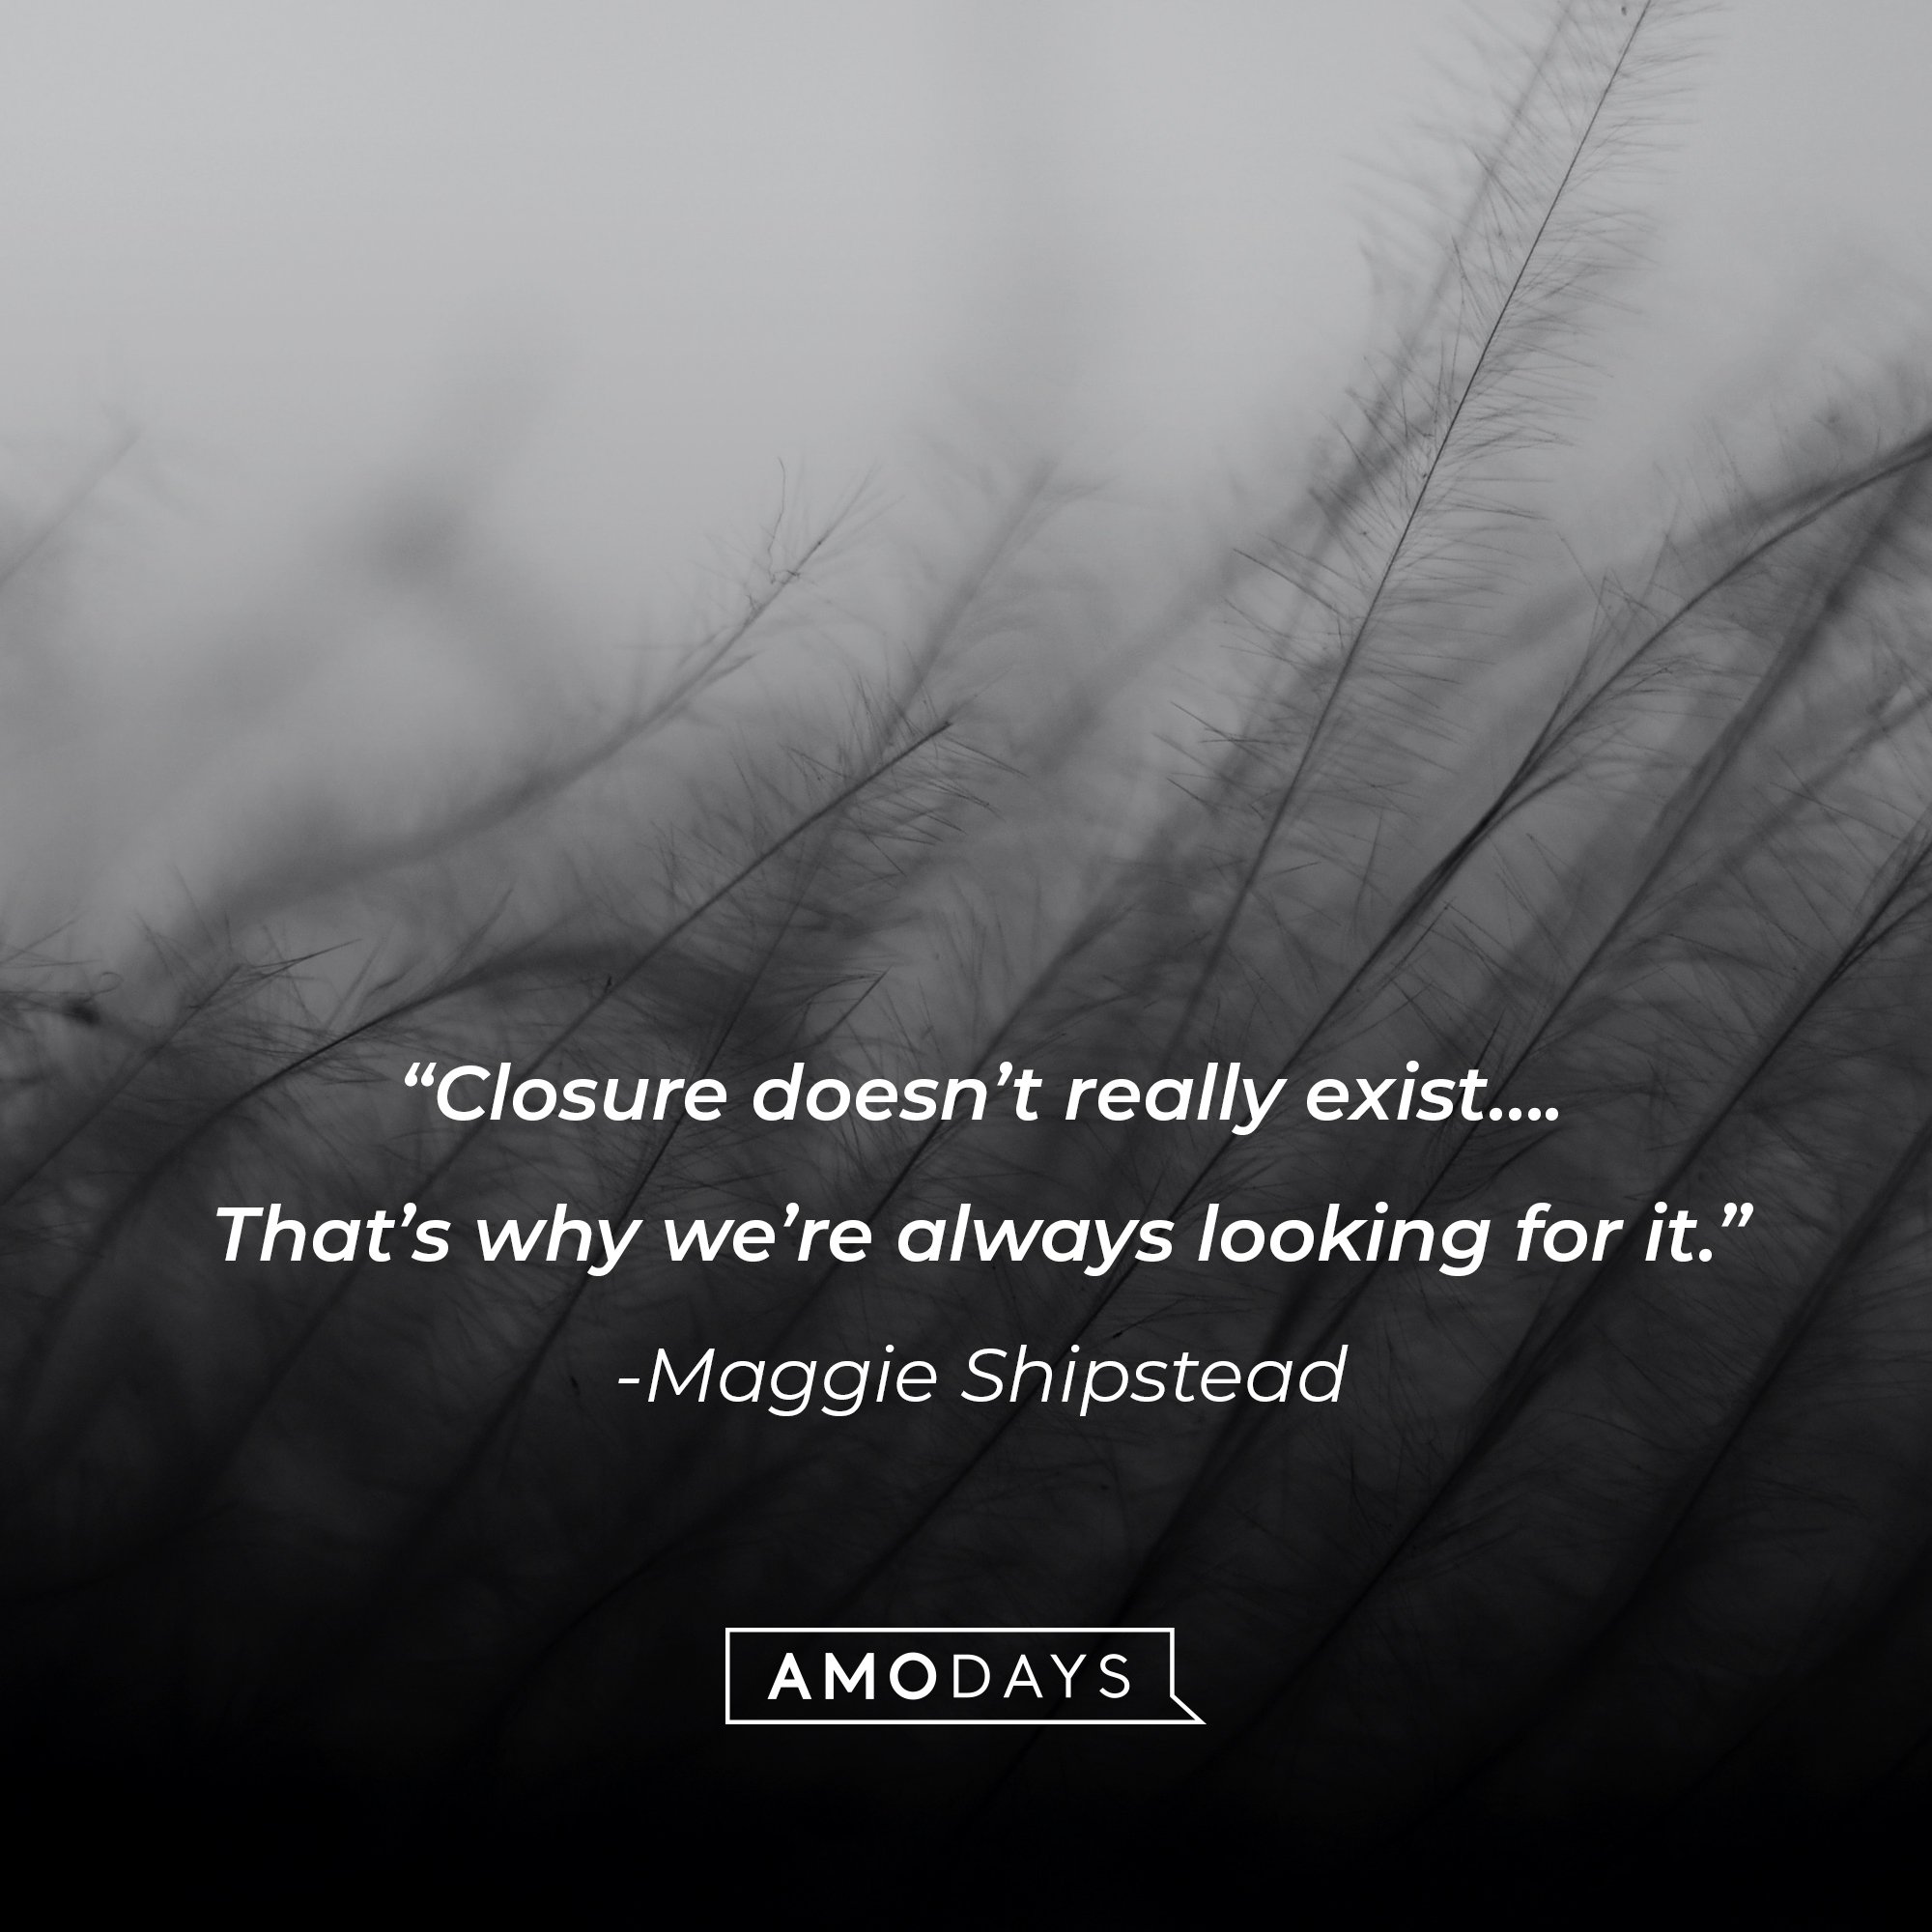 Maggie Shipstead's quote: "Closure doesn't really exist….That's why we're always looking for it." | Image: AmoDays